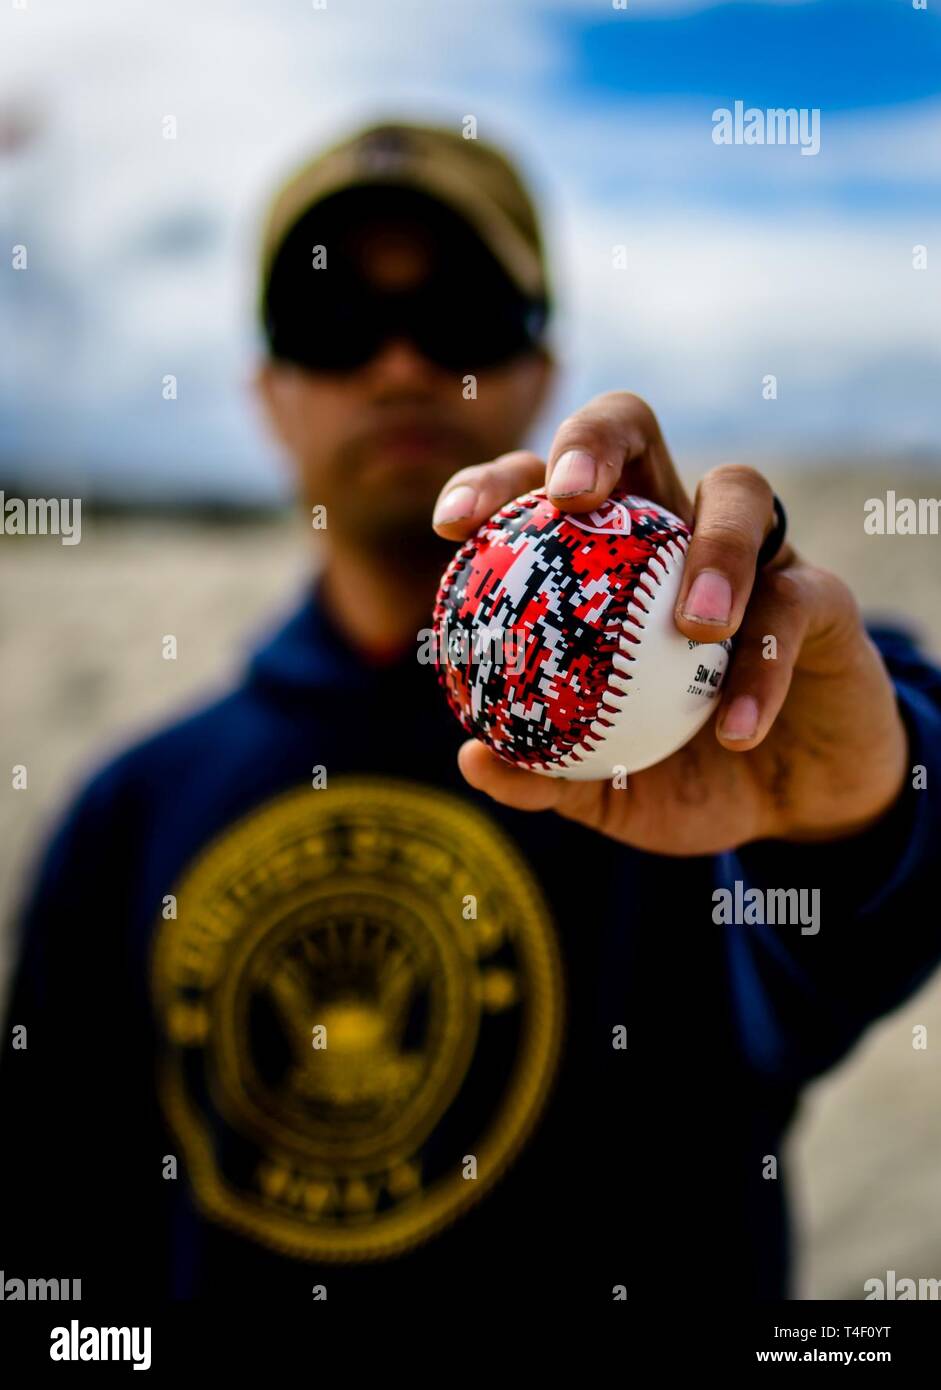 DIEGO (April 5, 2019) Aviation Electronics Technician 2nd Class Lloyd Stipe, assigned to the amphibious assault ship USS Makin Island (LHD 8), holds up a baseball found during a beach cleanup at Silver Strand State Beach. Nearly 100 Sailors volunteered to pick up trash along a 1.25-mile portion of the beach. Makin Island, homeported in San Diego, is conducting a depot level maintenance availability. Stock Photo